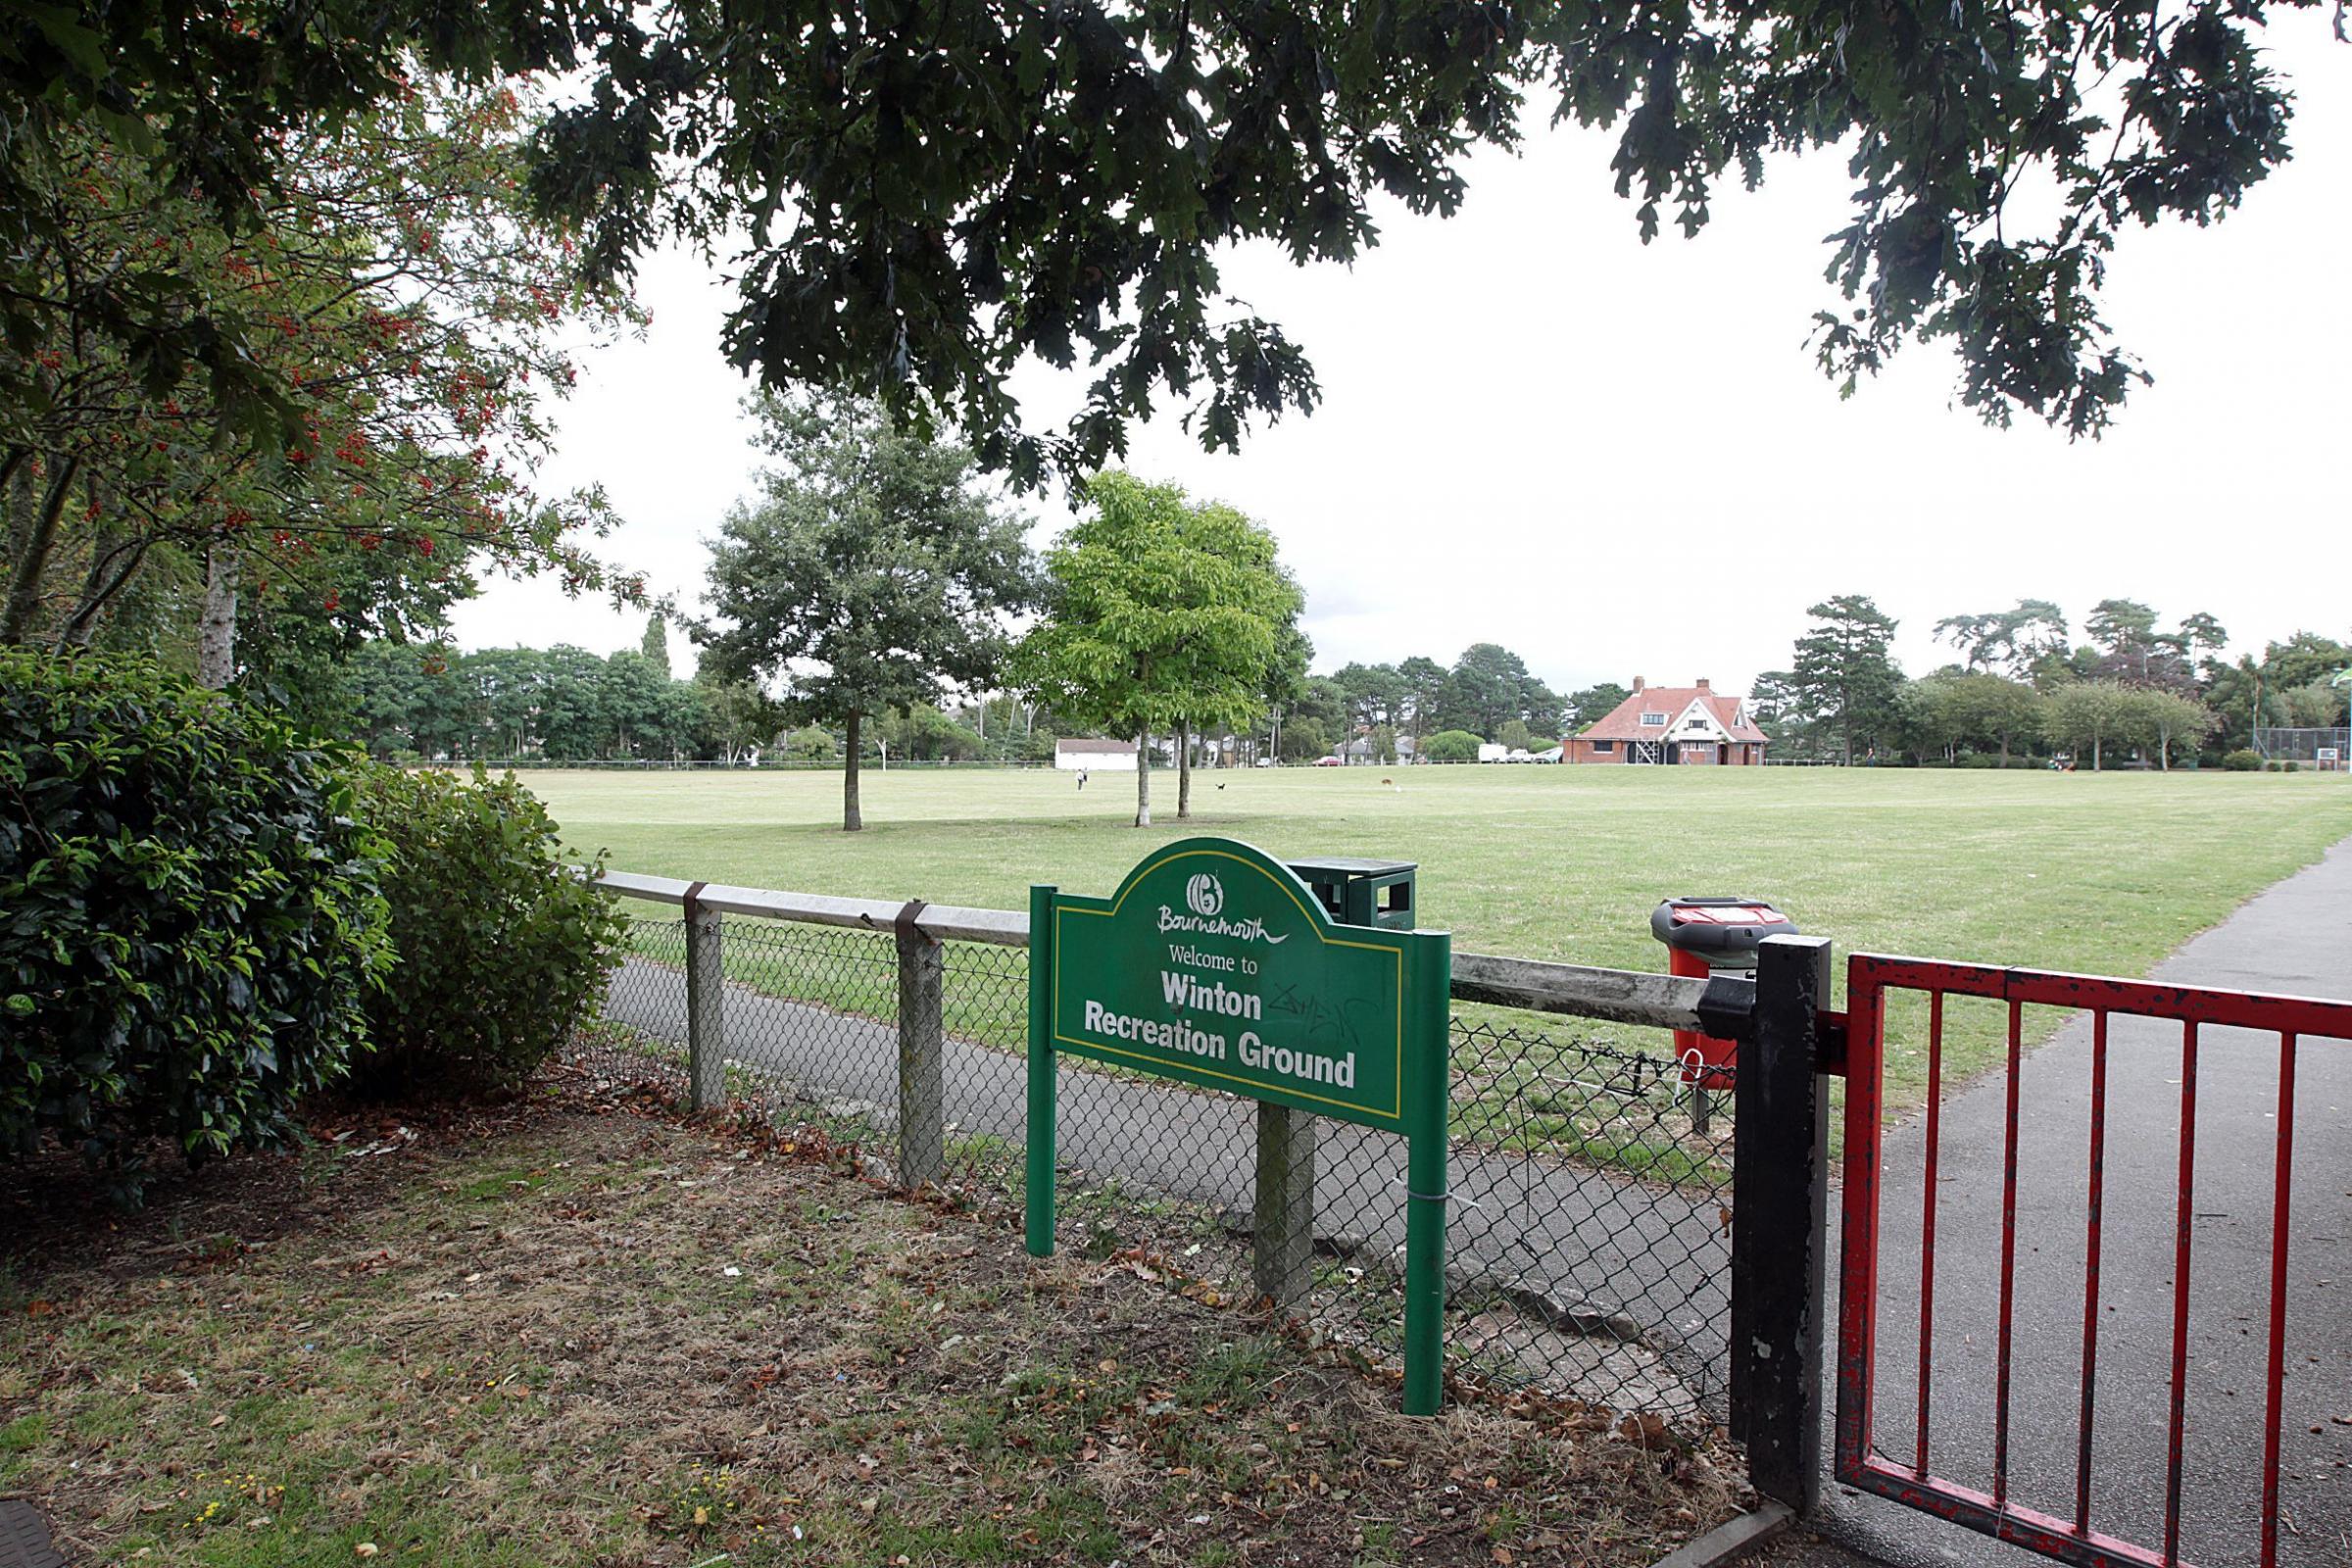 Cricket pavilion plans are approved despite objections